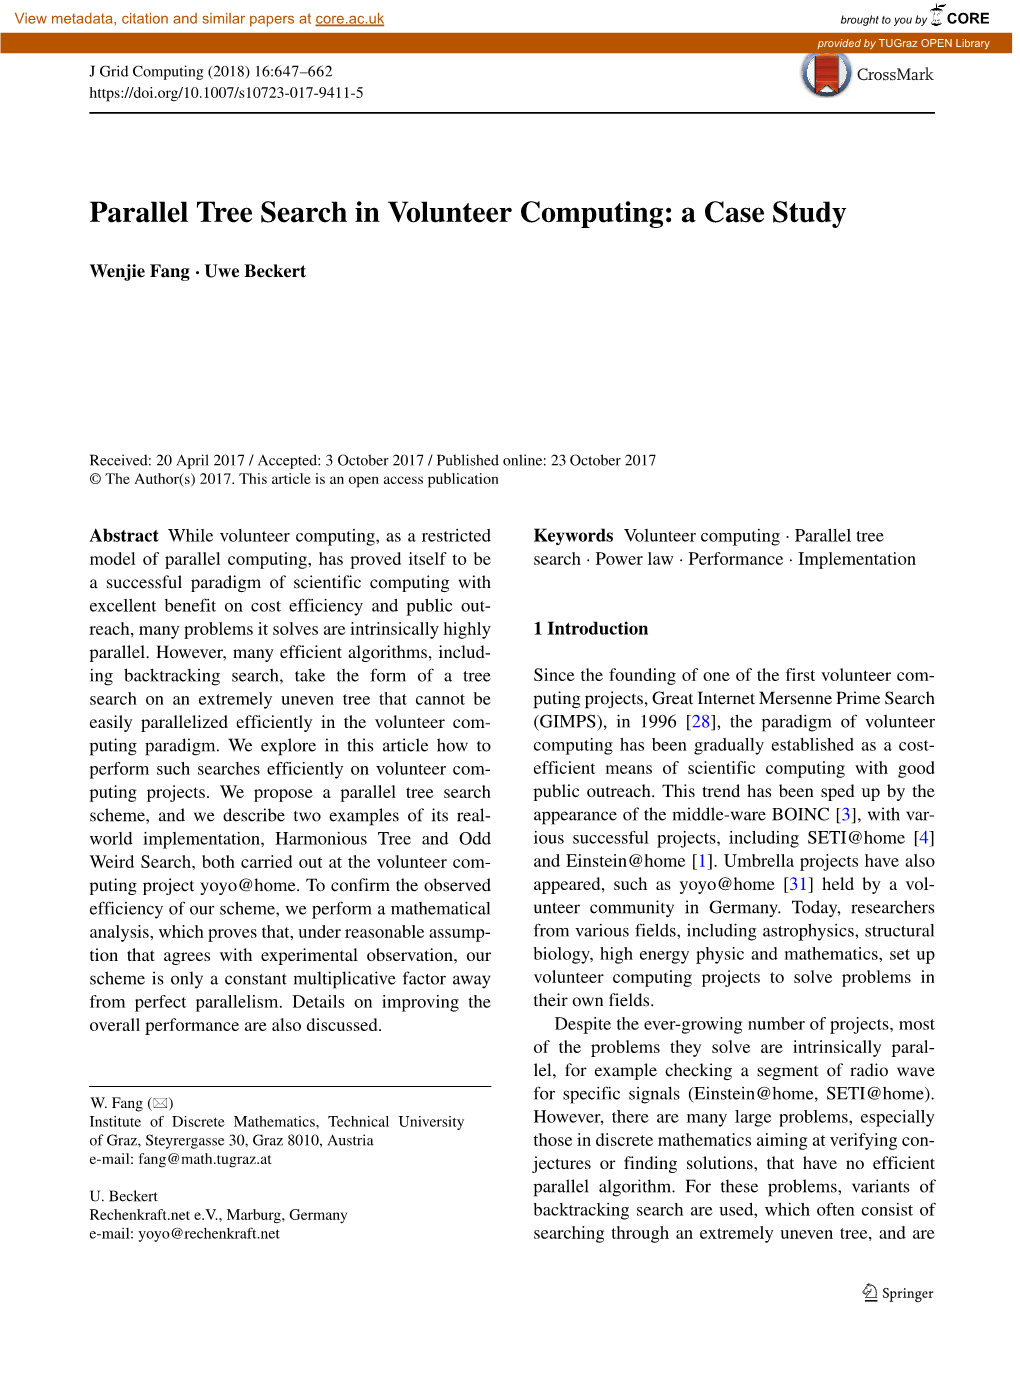 Parallel Tree Search in Volunteer Computing: a Case Study